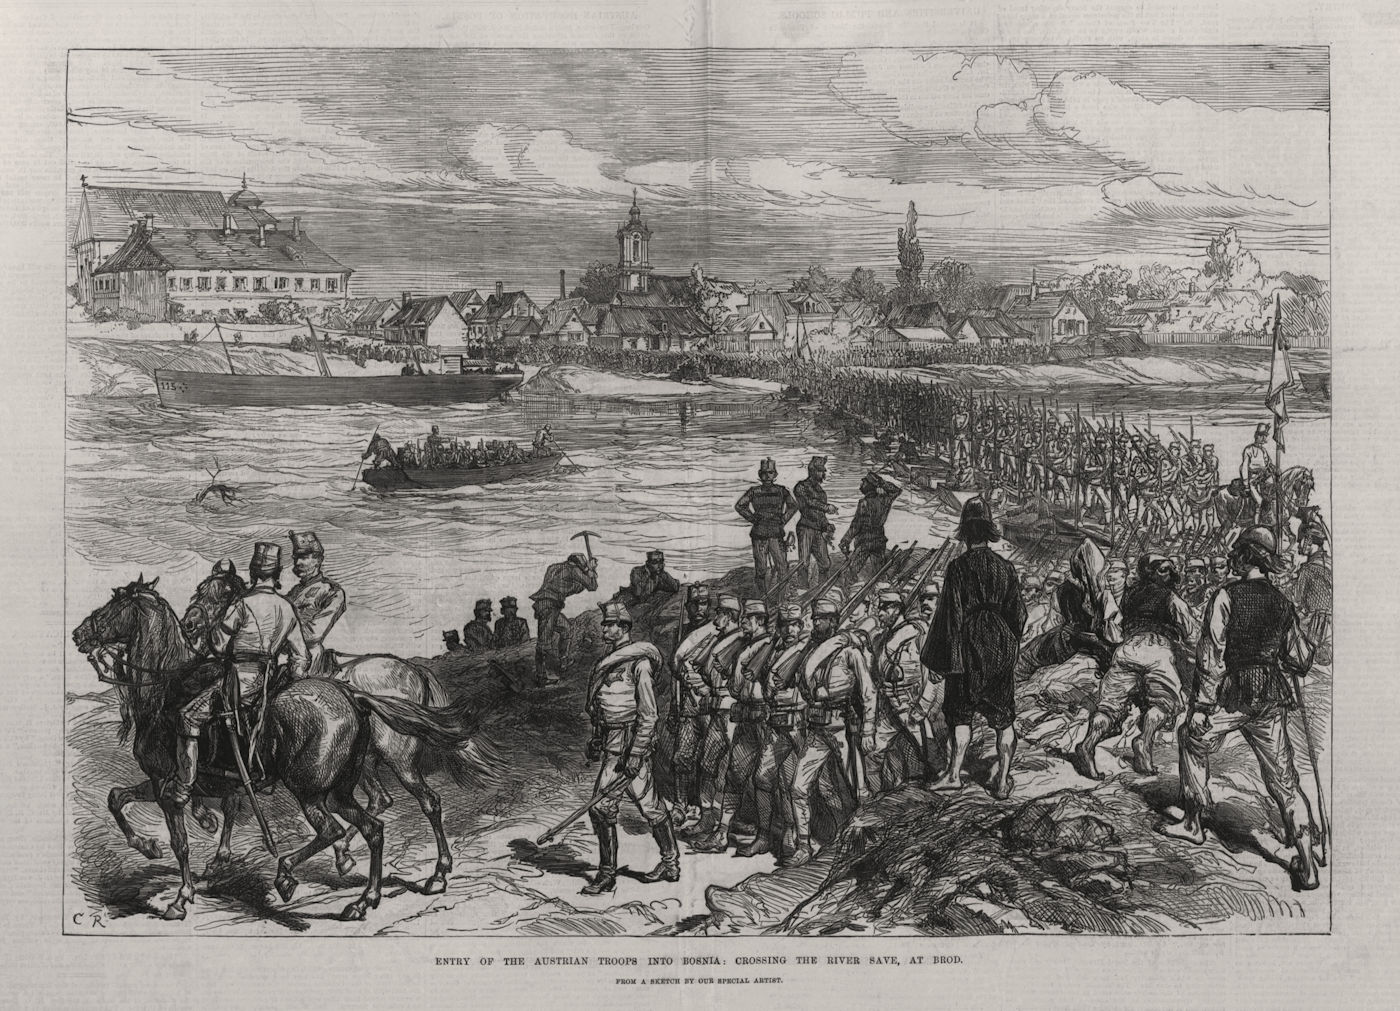 Associate Product Austrian troops entering Bosnia: Crossing the river Sava, at Brod 1878 print